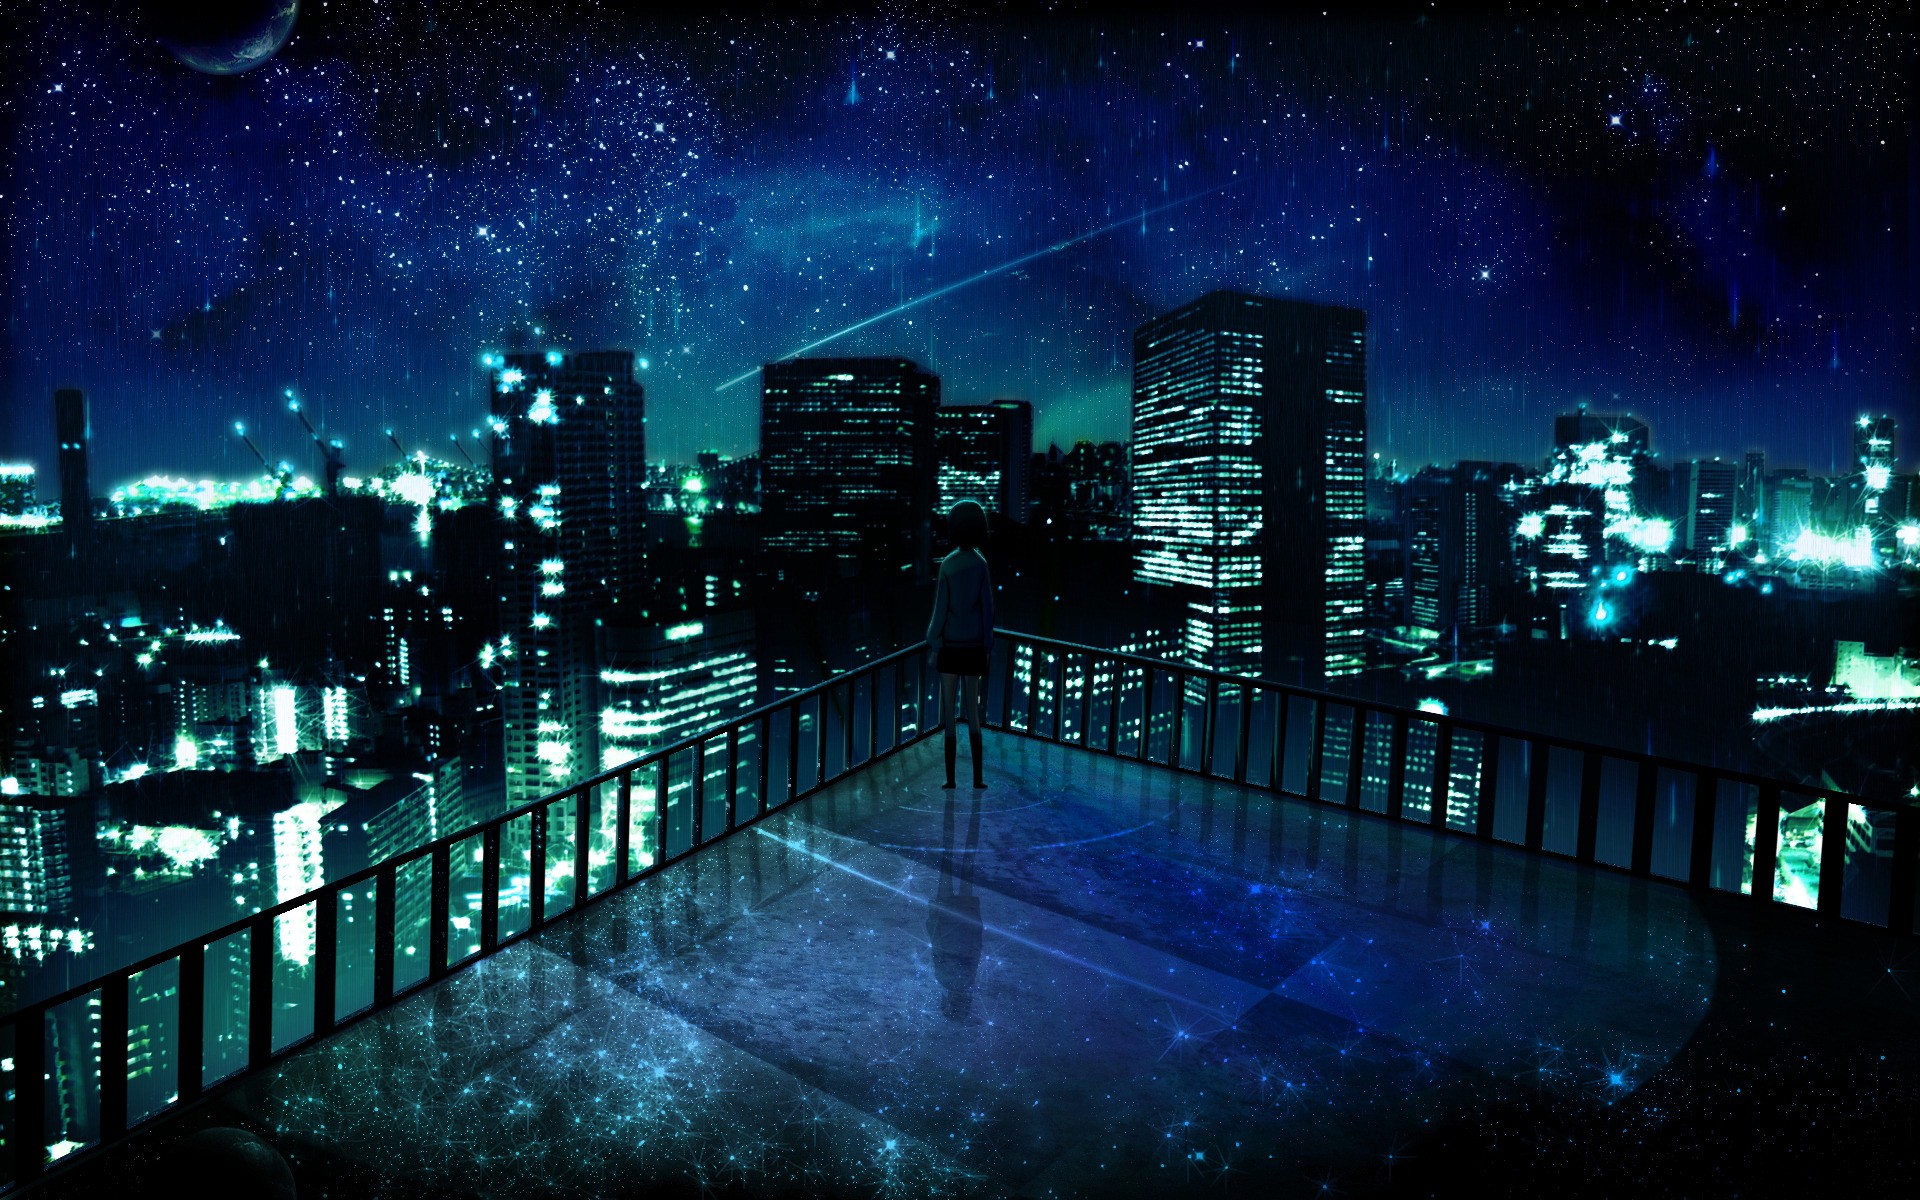 outer, Space, Cityscapes, Night, Stars, Alone, Balcony, Buildings, City, Lights, Artwork, Manga, Night, Landscapes Wallpaper